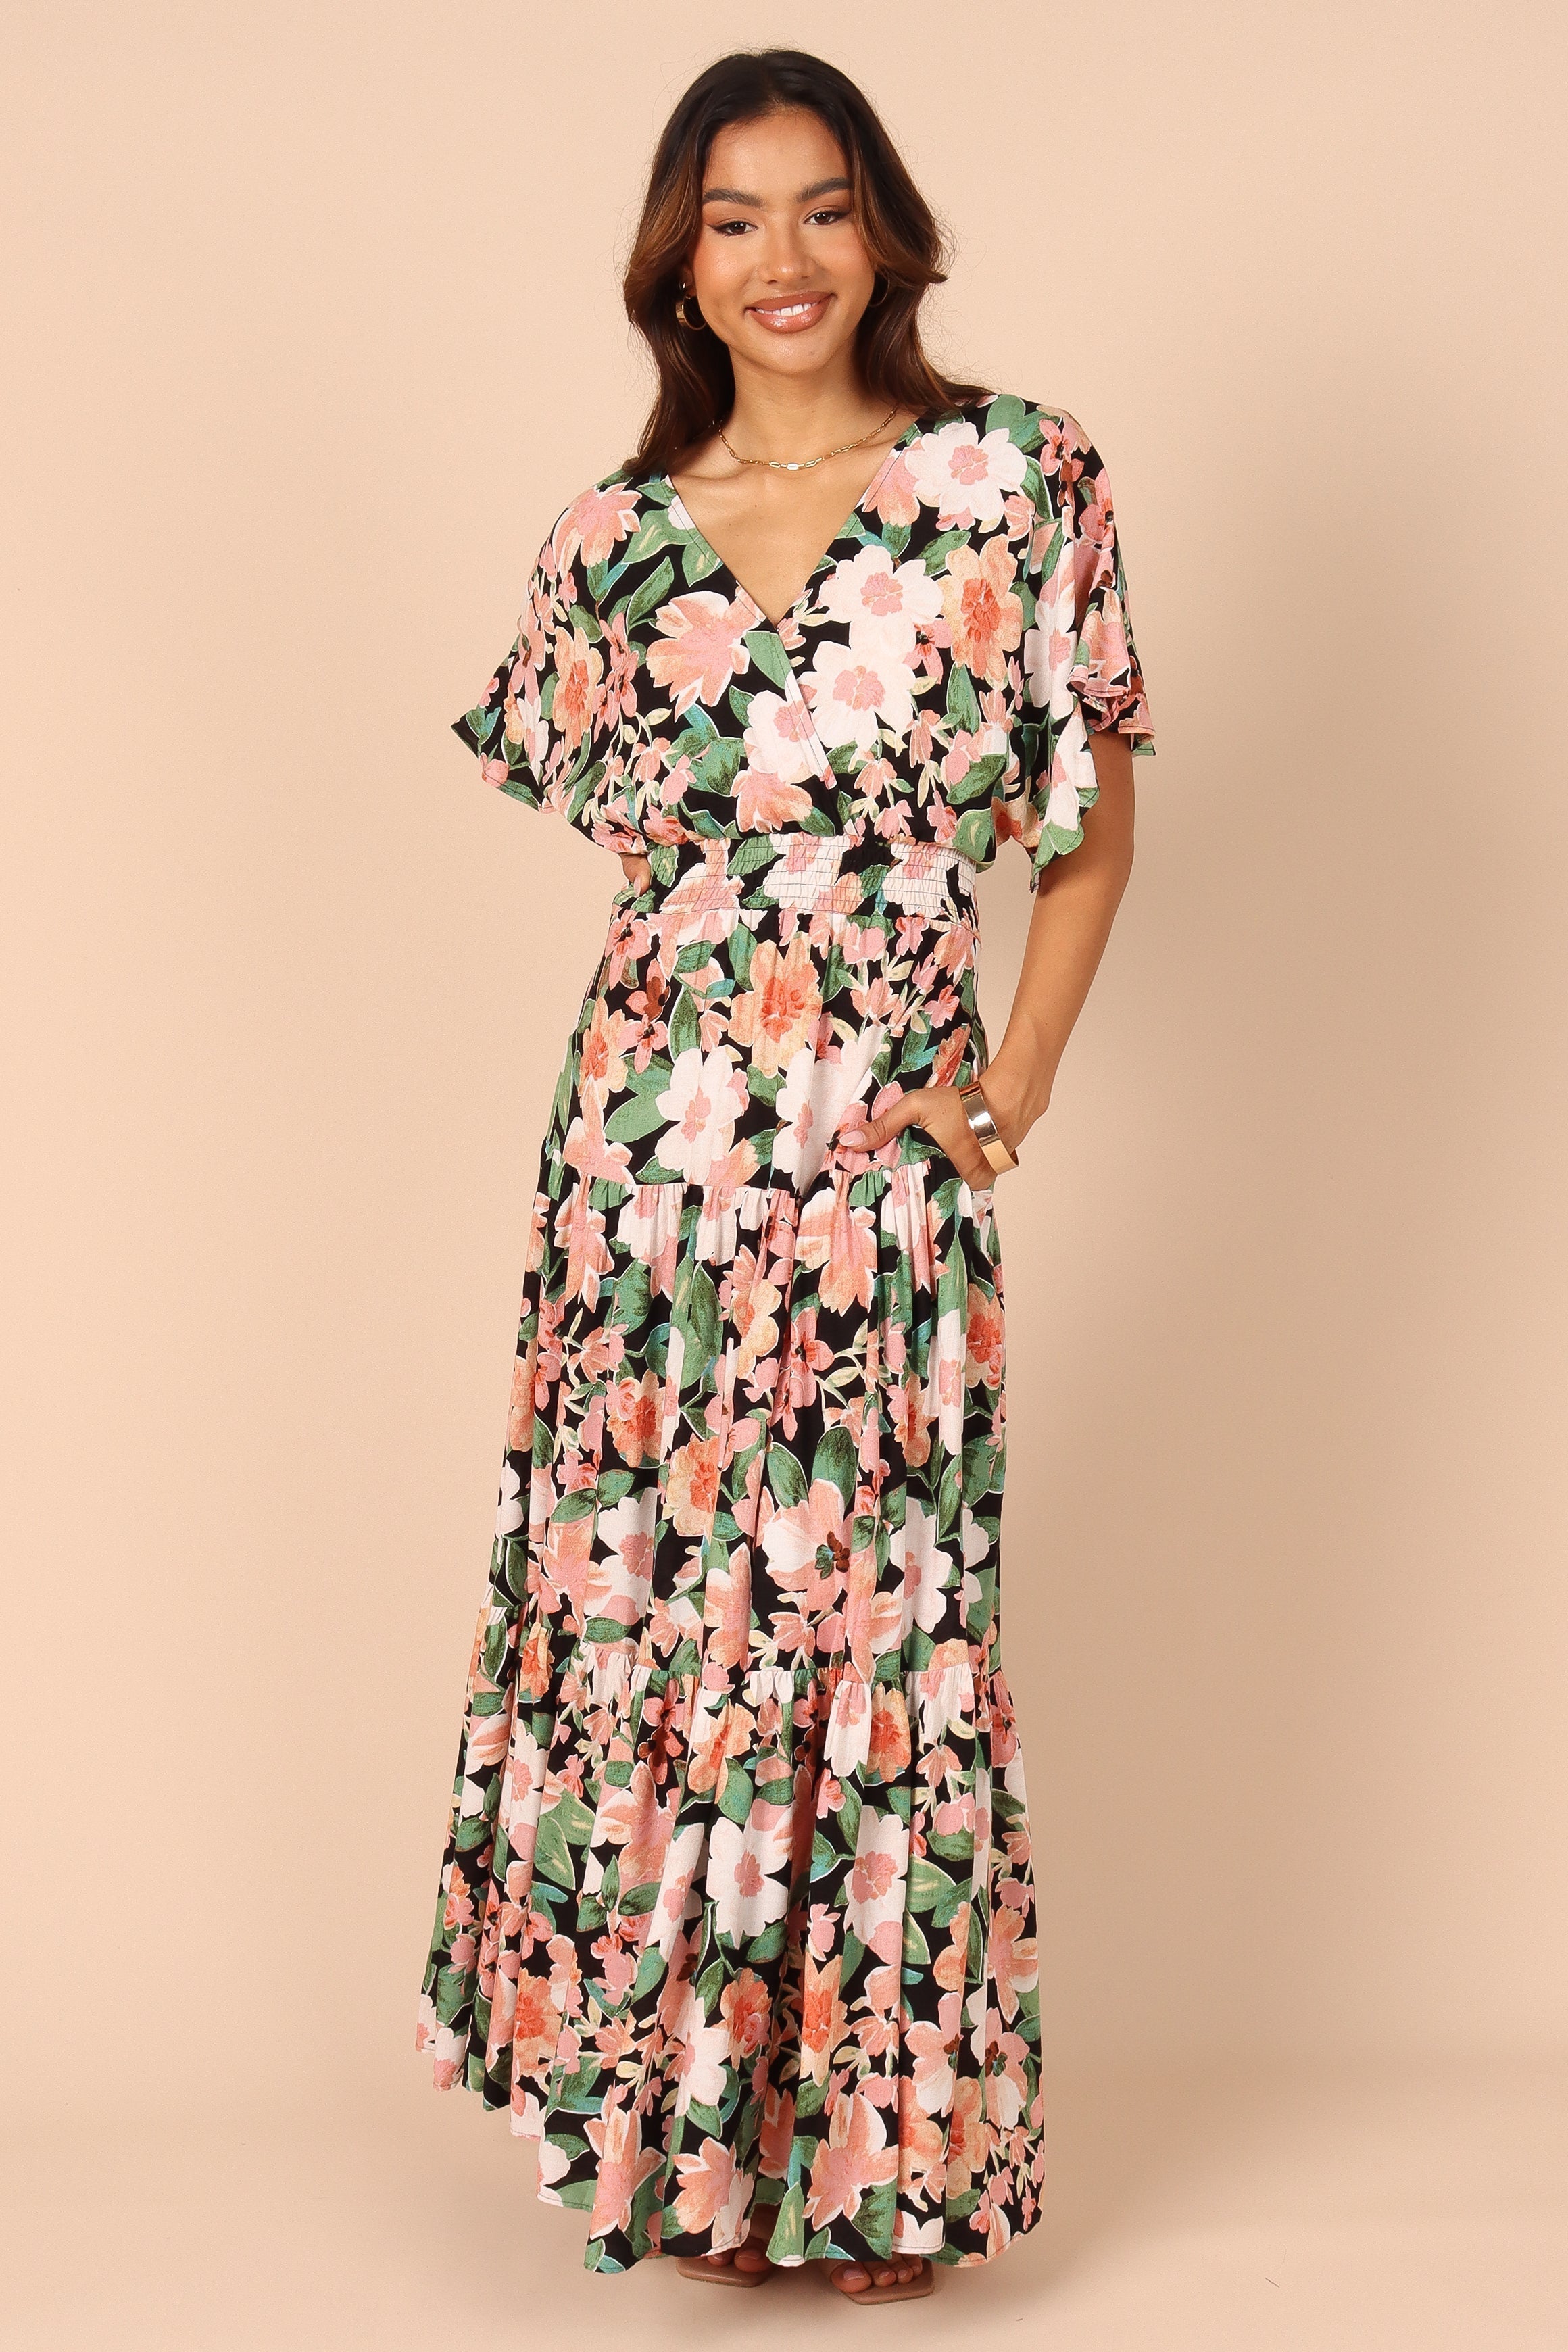 Peach Couture Plus Size Womens Sleeveless Exoctic Floral Print Maxi Dresses  1X, 2X, 3X